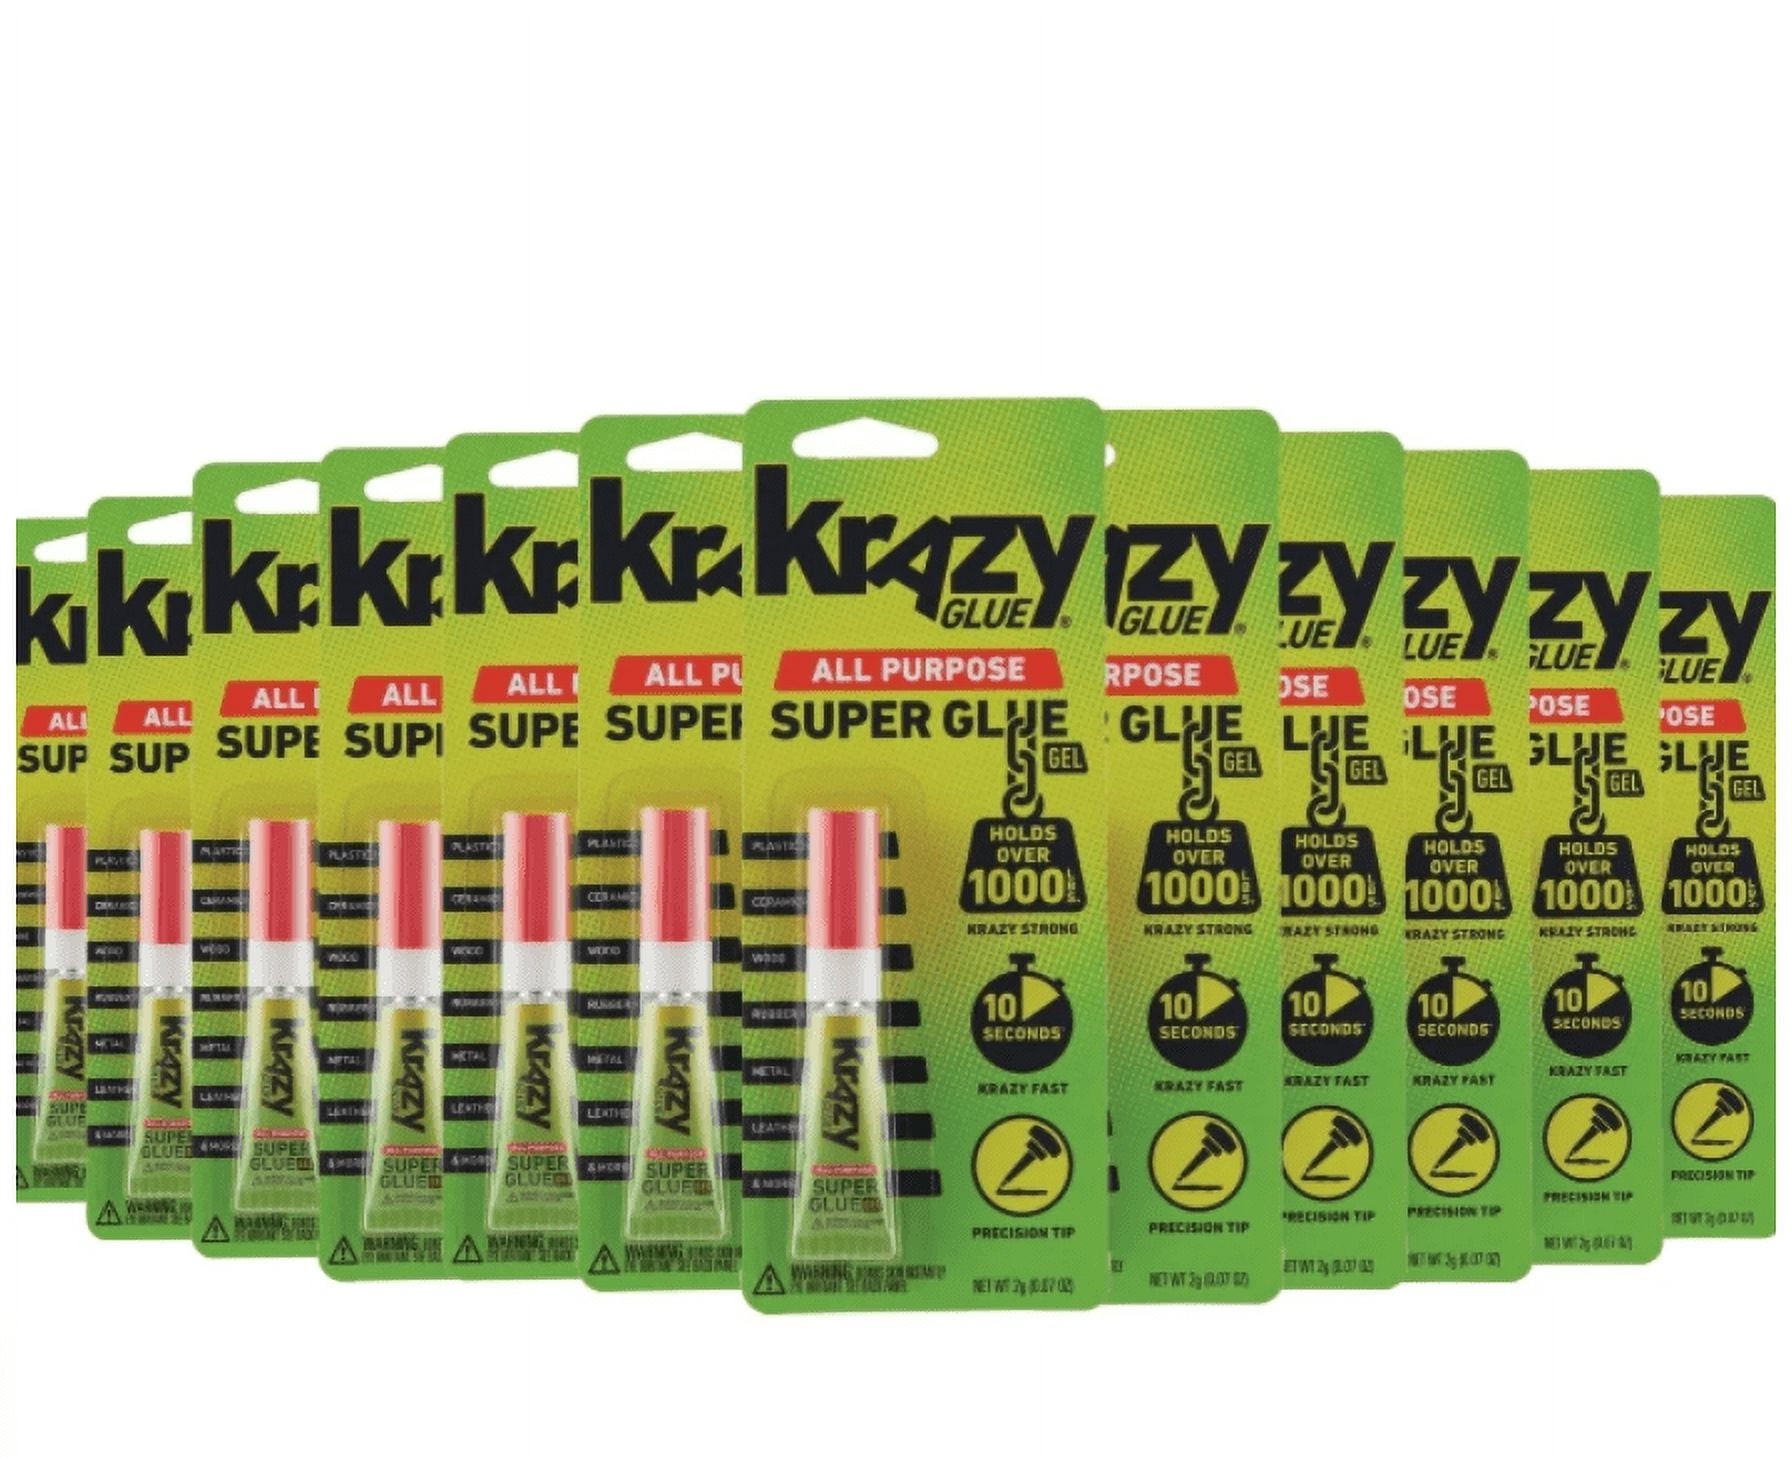 Save on Krazy Glue All-Purpose Precision Control Pen Order Online